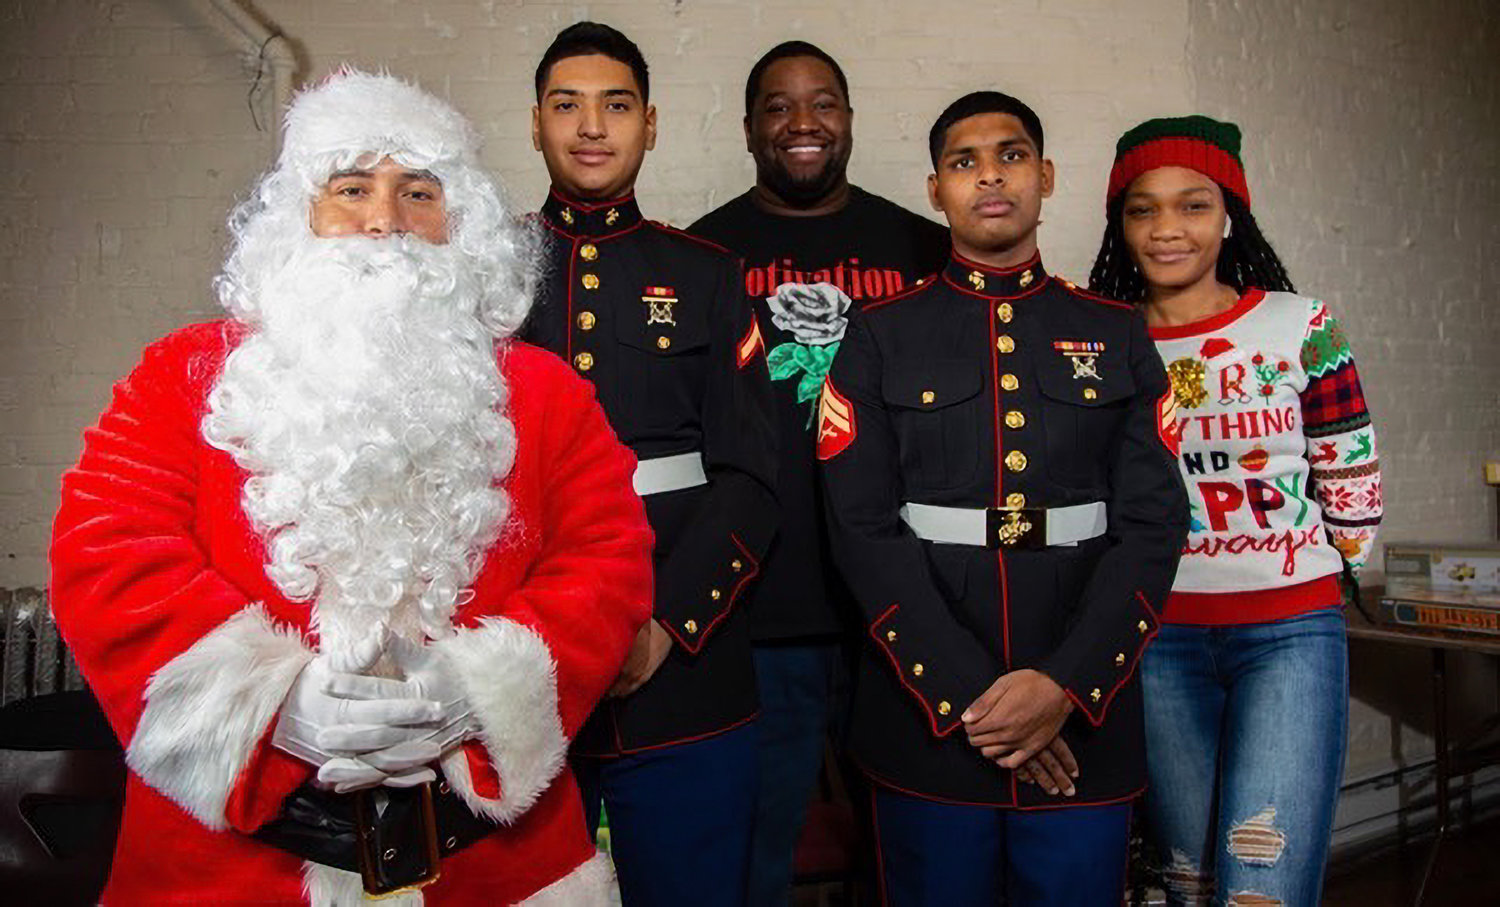 Gonzalo Duran, aka Santa Claus, strikes a pose with some Marines and their family members during a previous event as part of his company Devil Dog USA’s Santa program where military families are given presents donated by community groups.